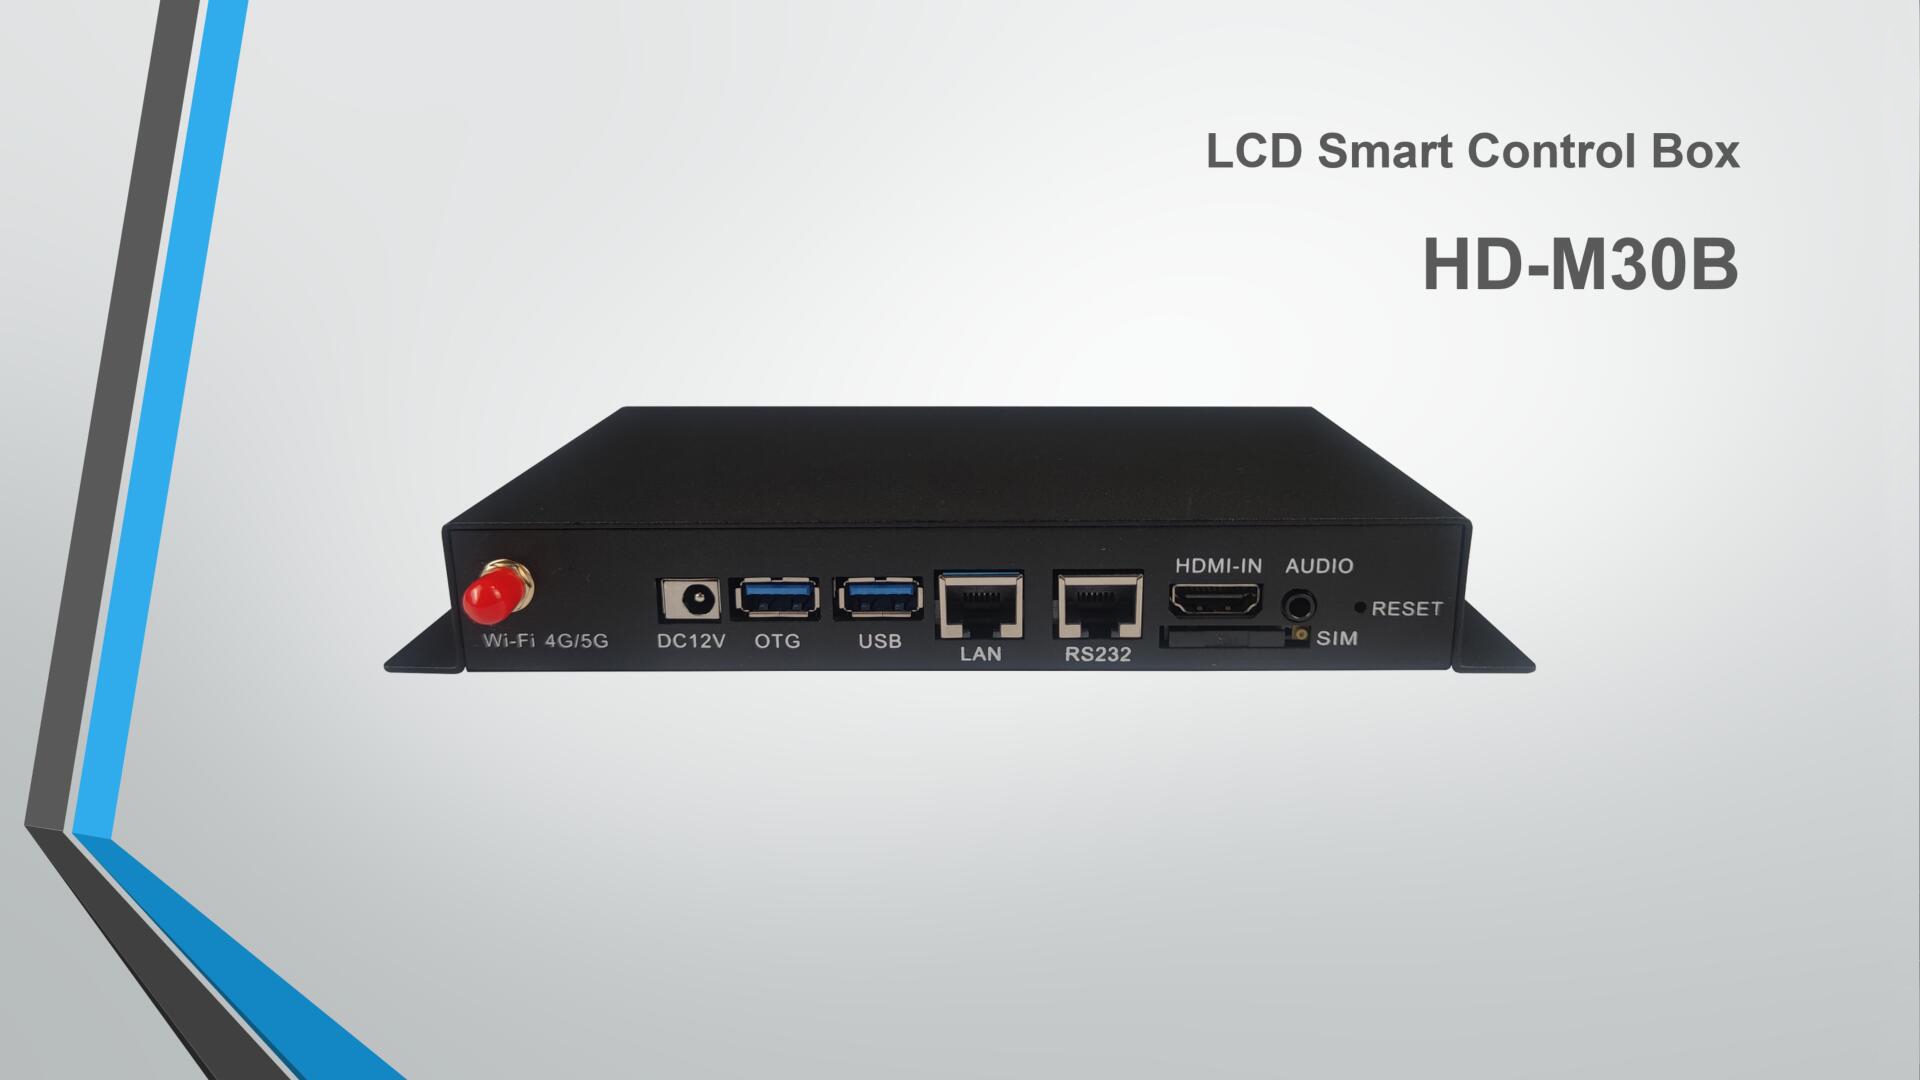 Practical LCD HD-M30B control card with high security